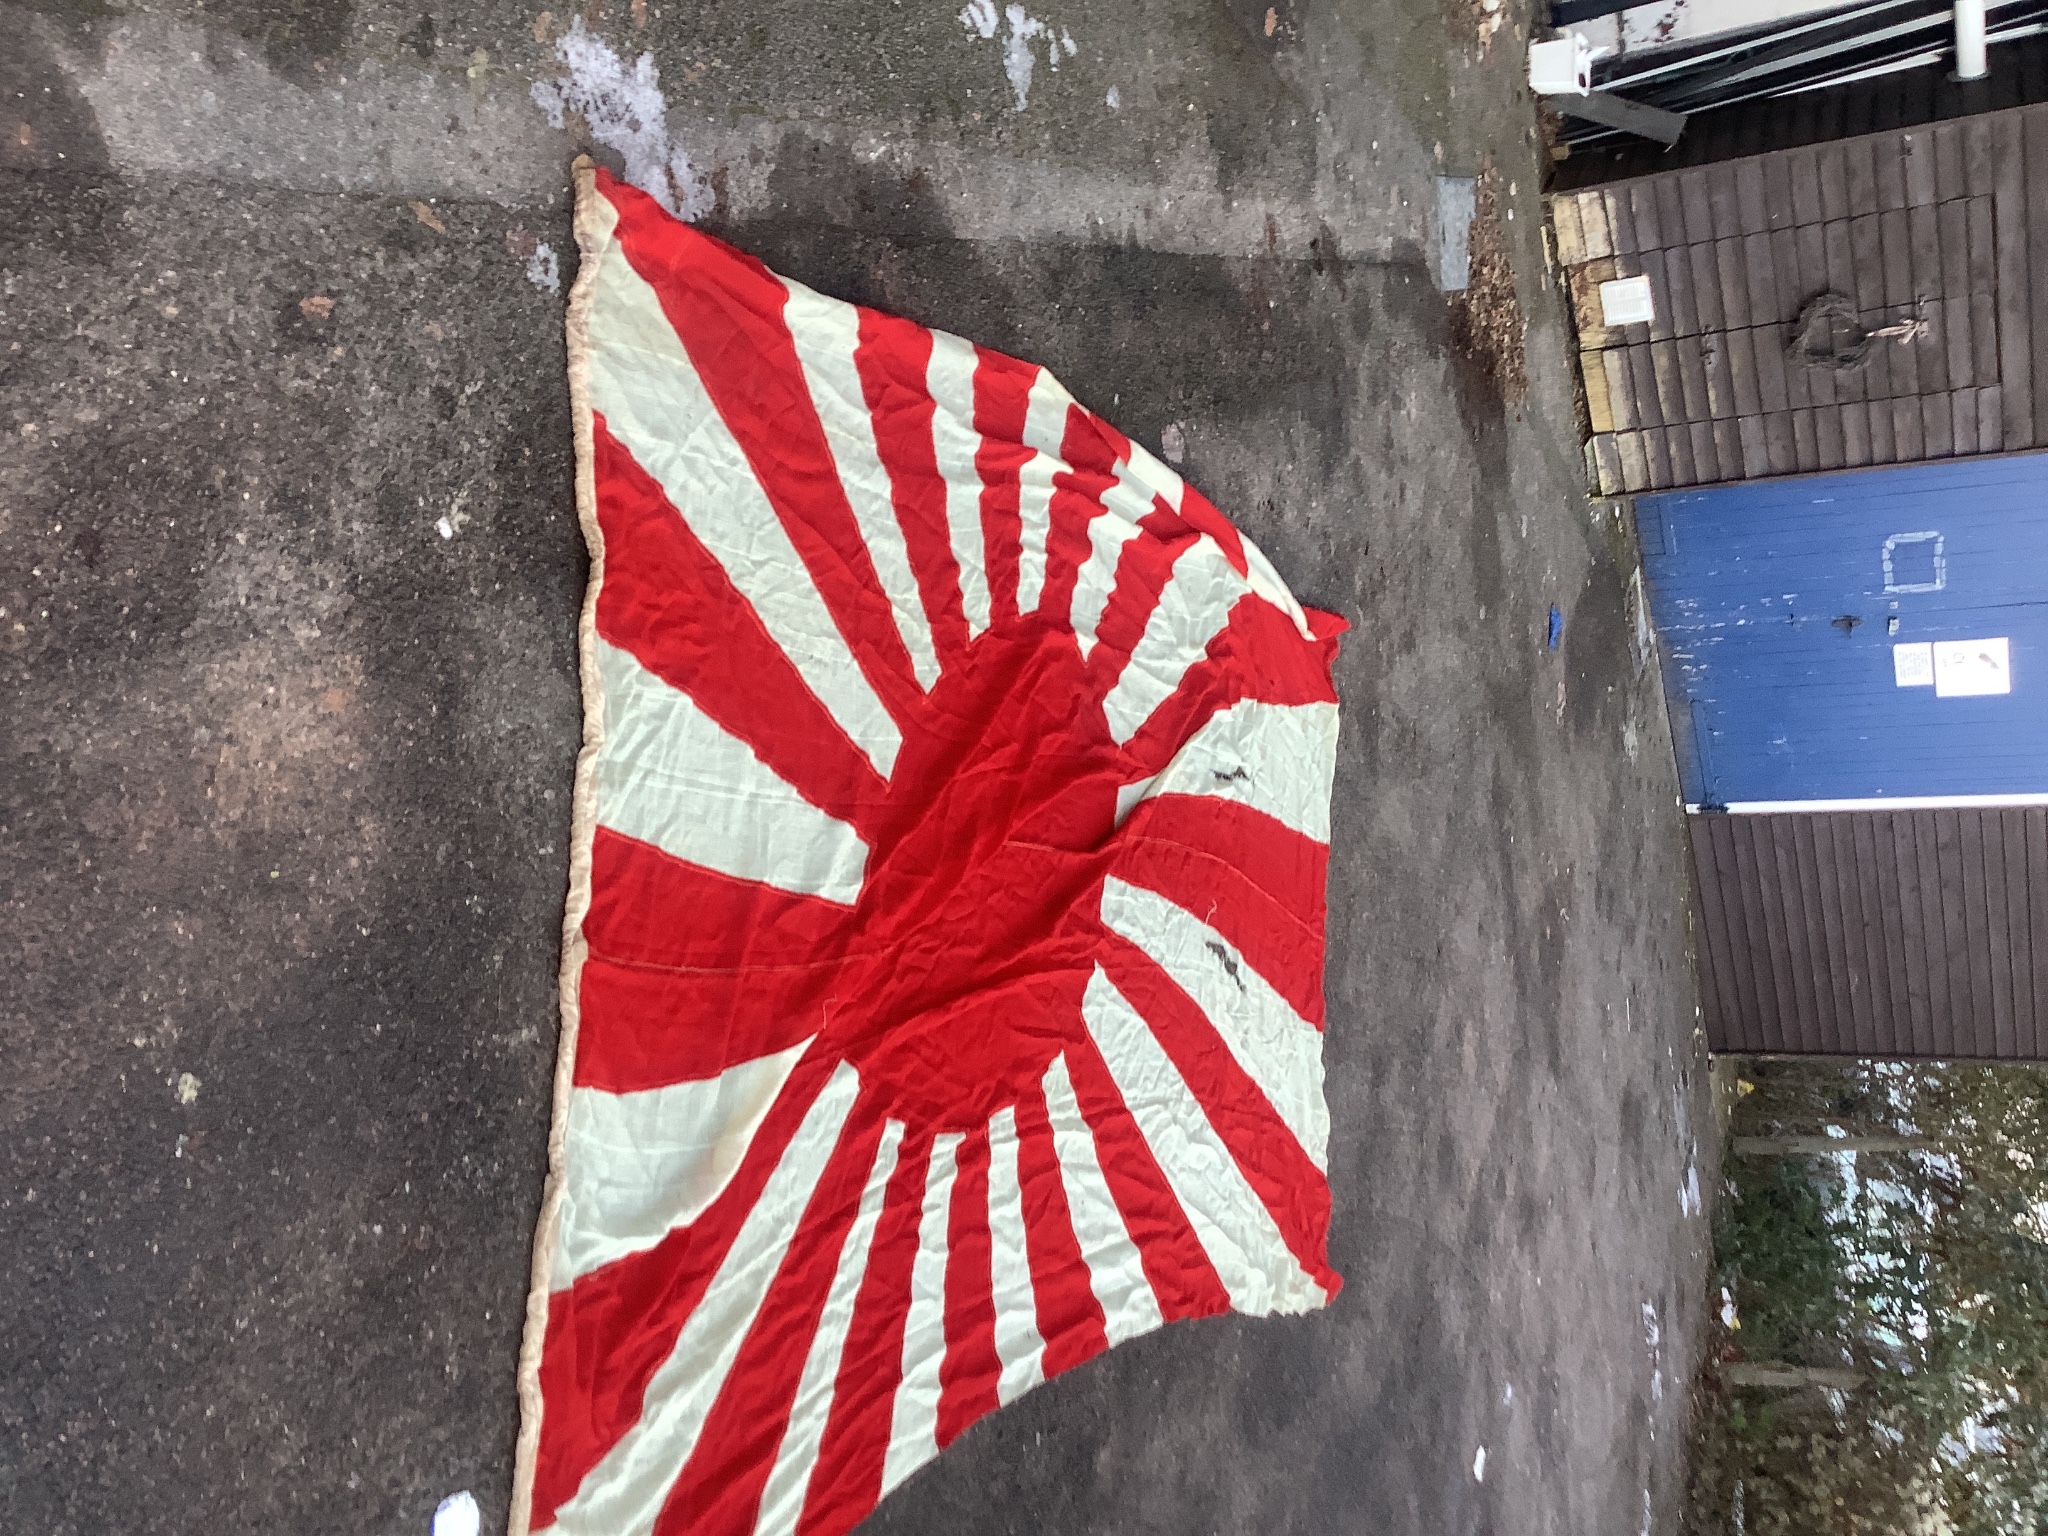 A large German Third Reich flag, 300 x 160cm, a Japan Rising Sun flag, 260cm, and other national flags